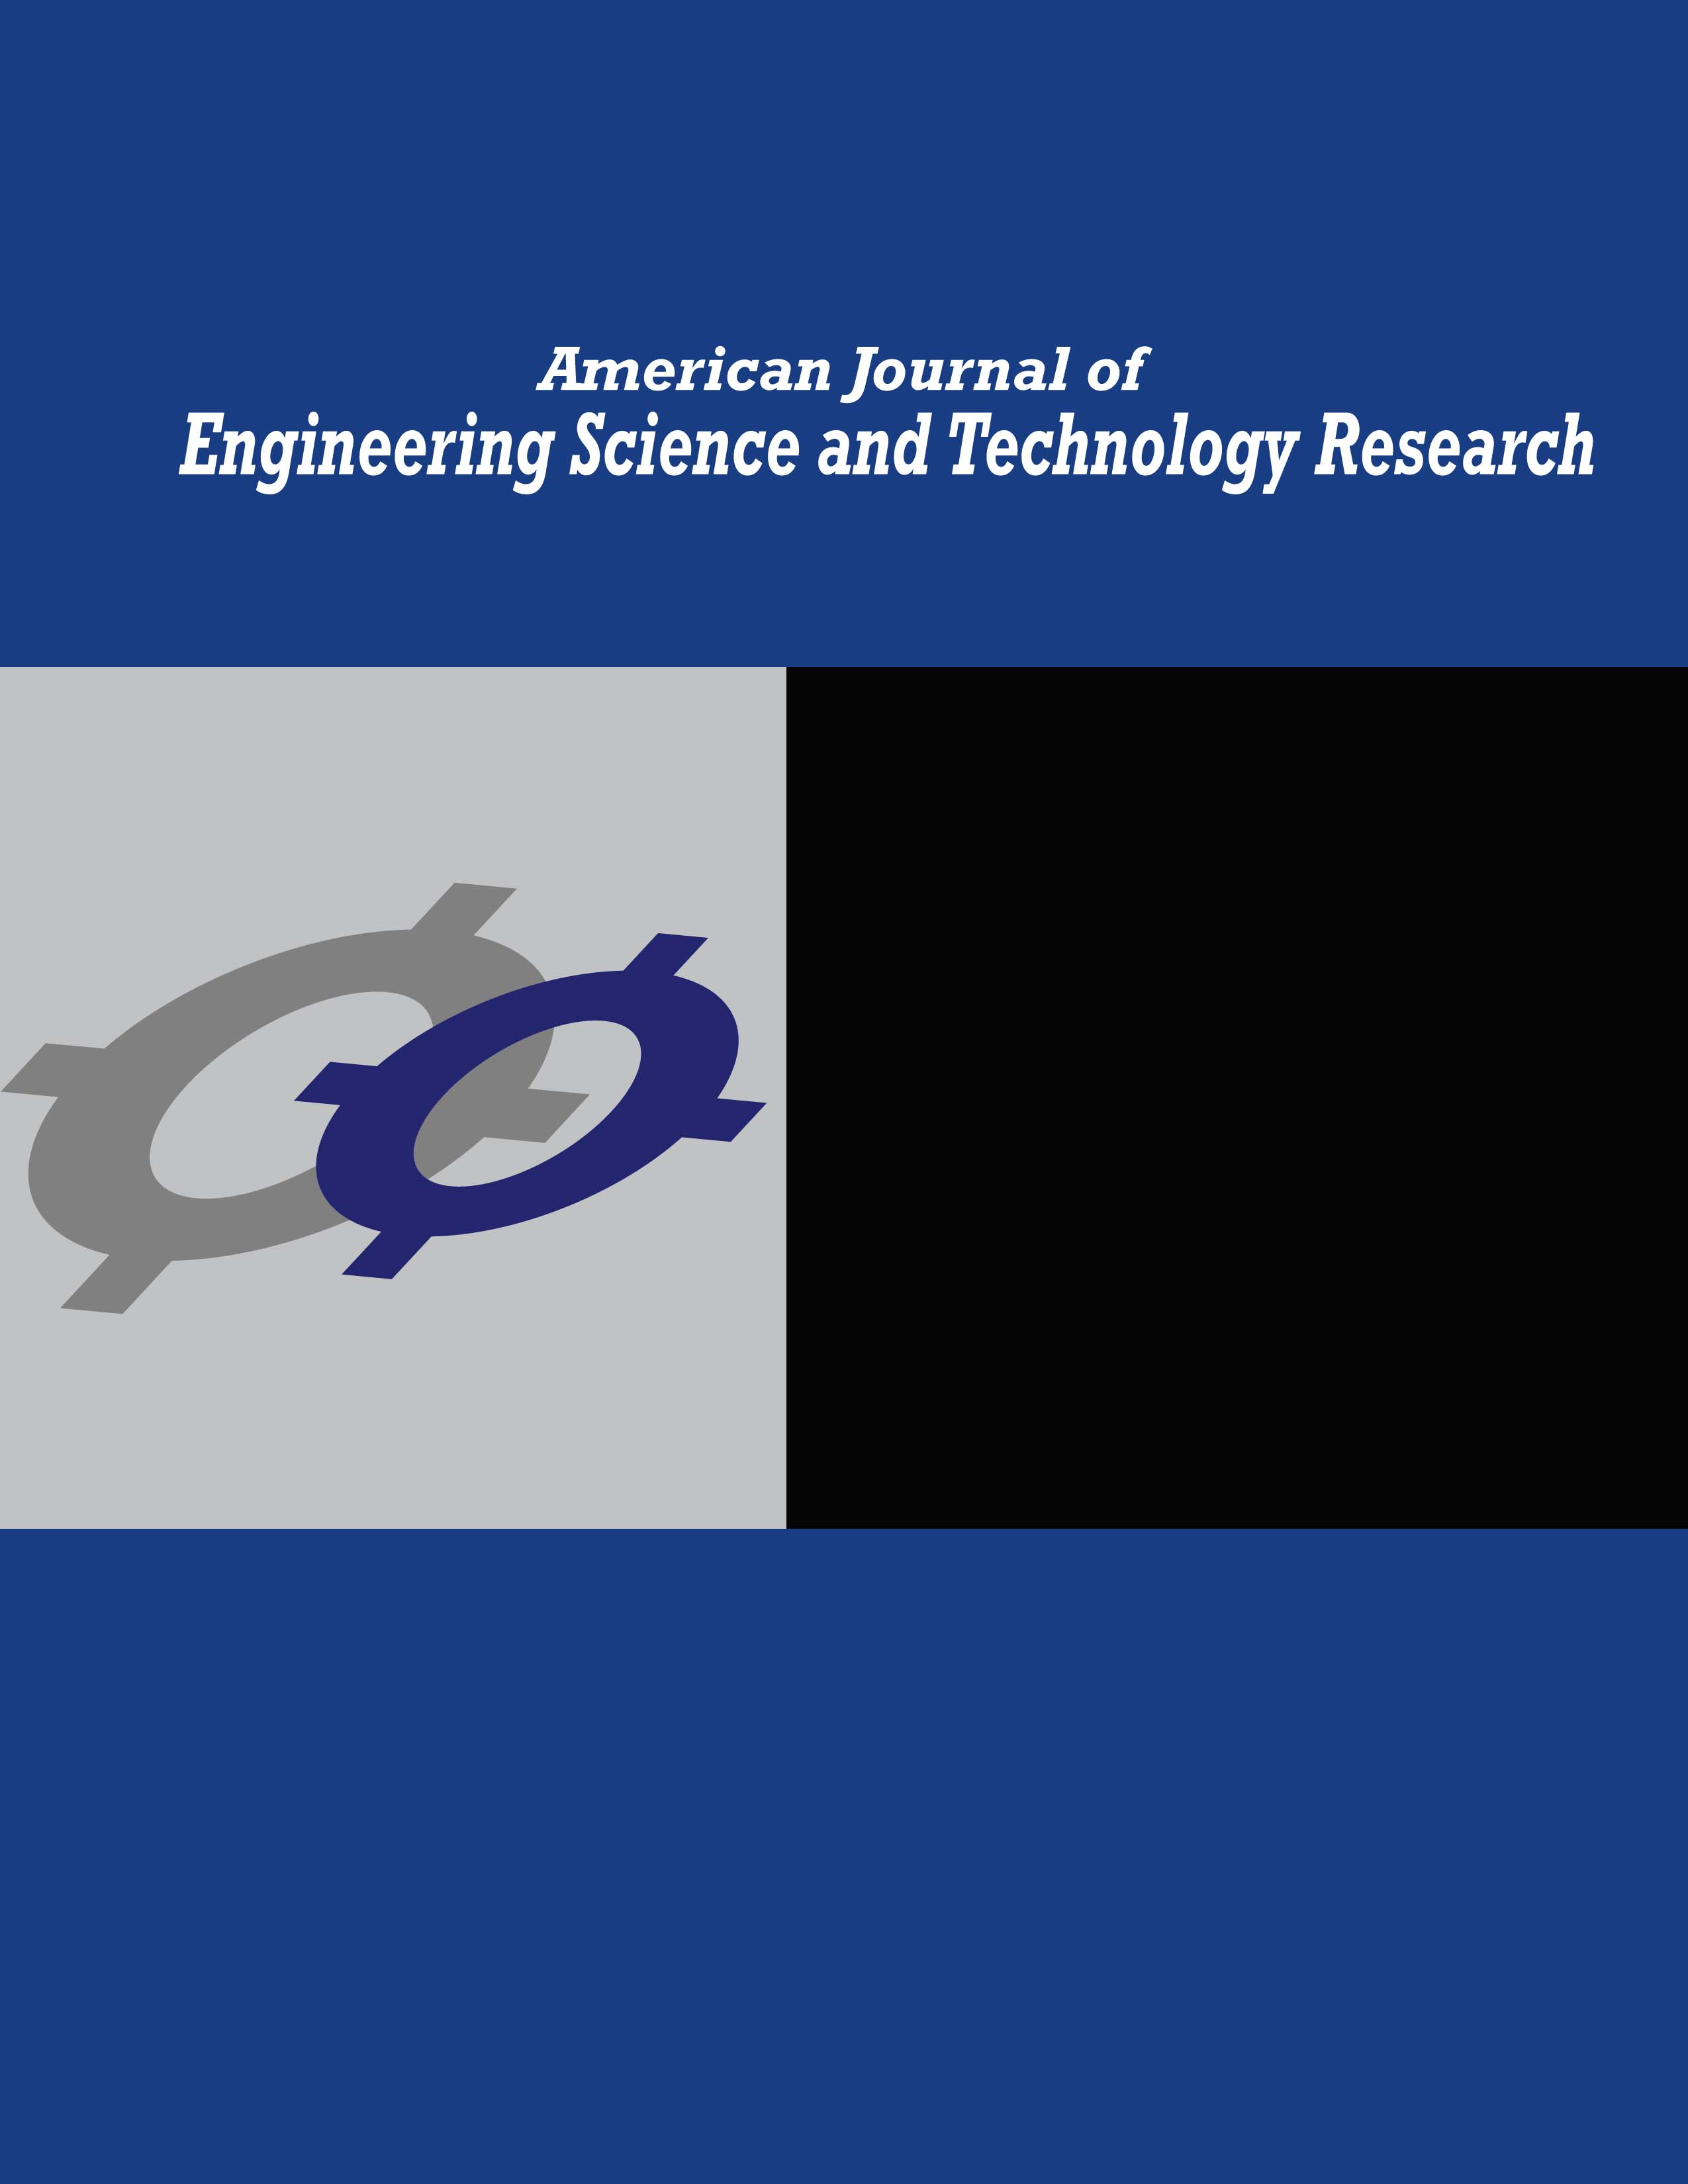 American Journal of Engineering Science and Technology Research